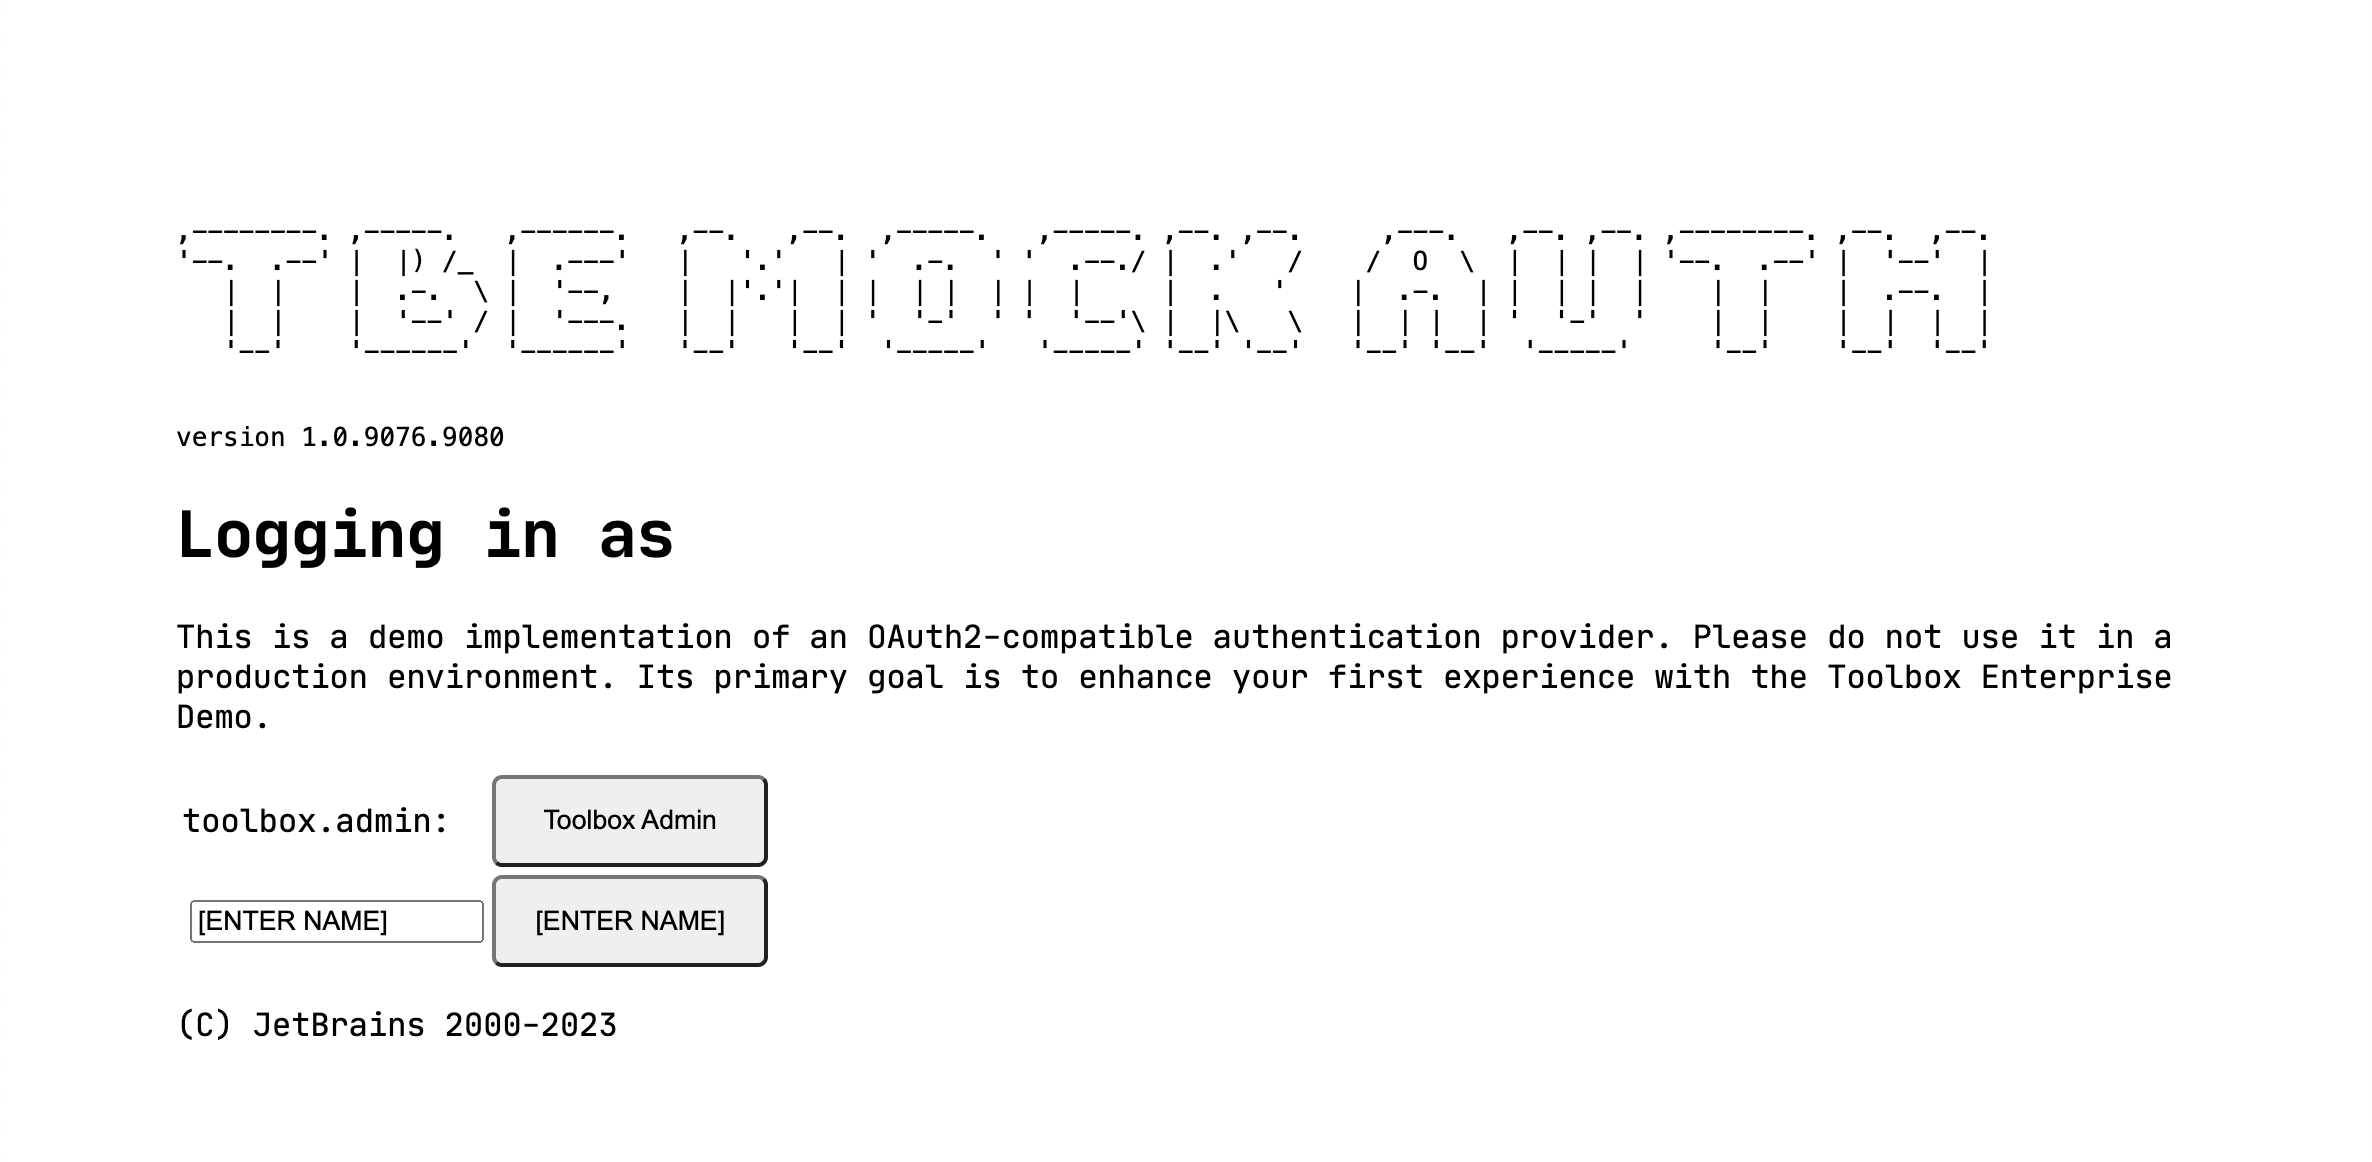 the Mock Auth interface